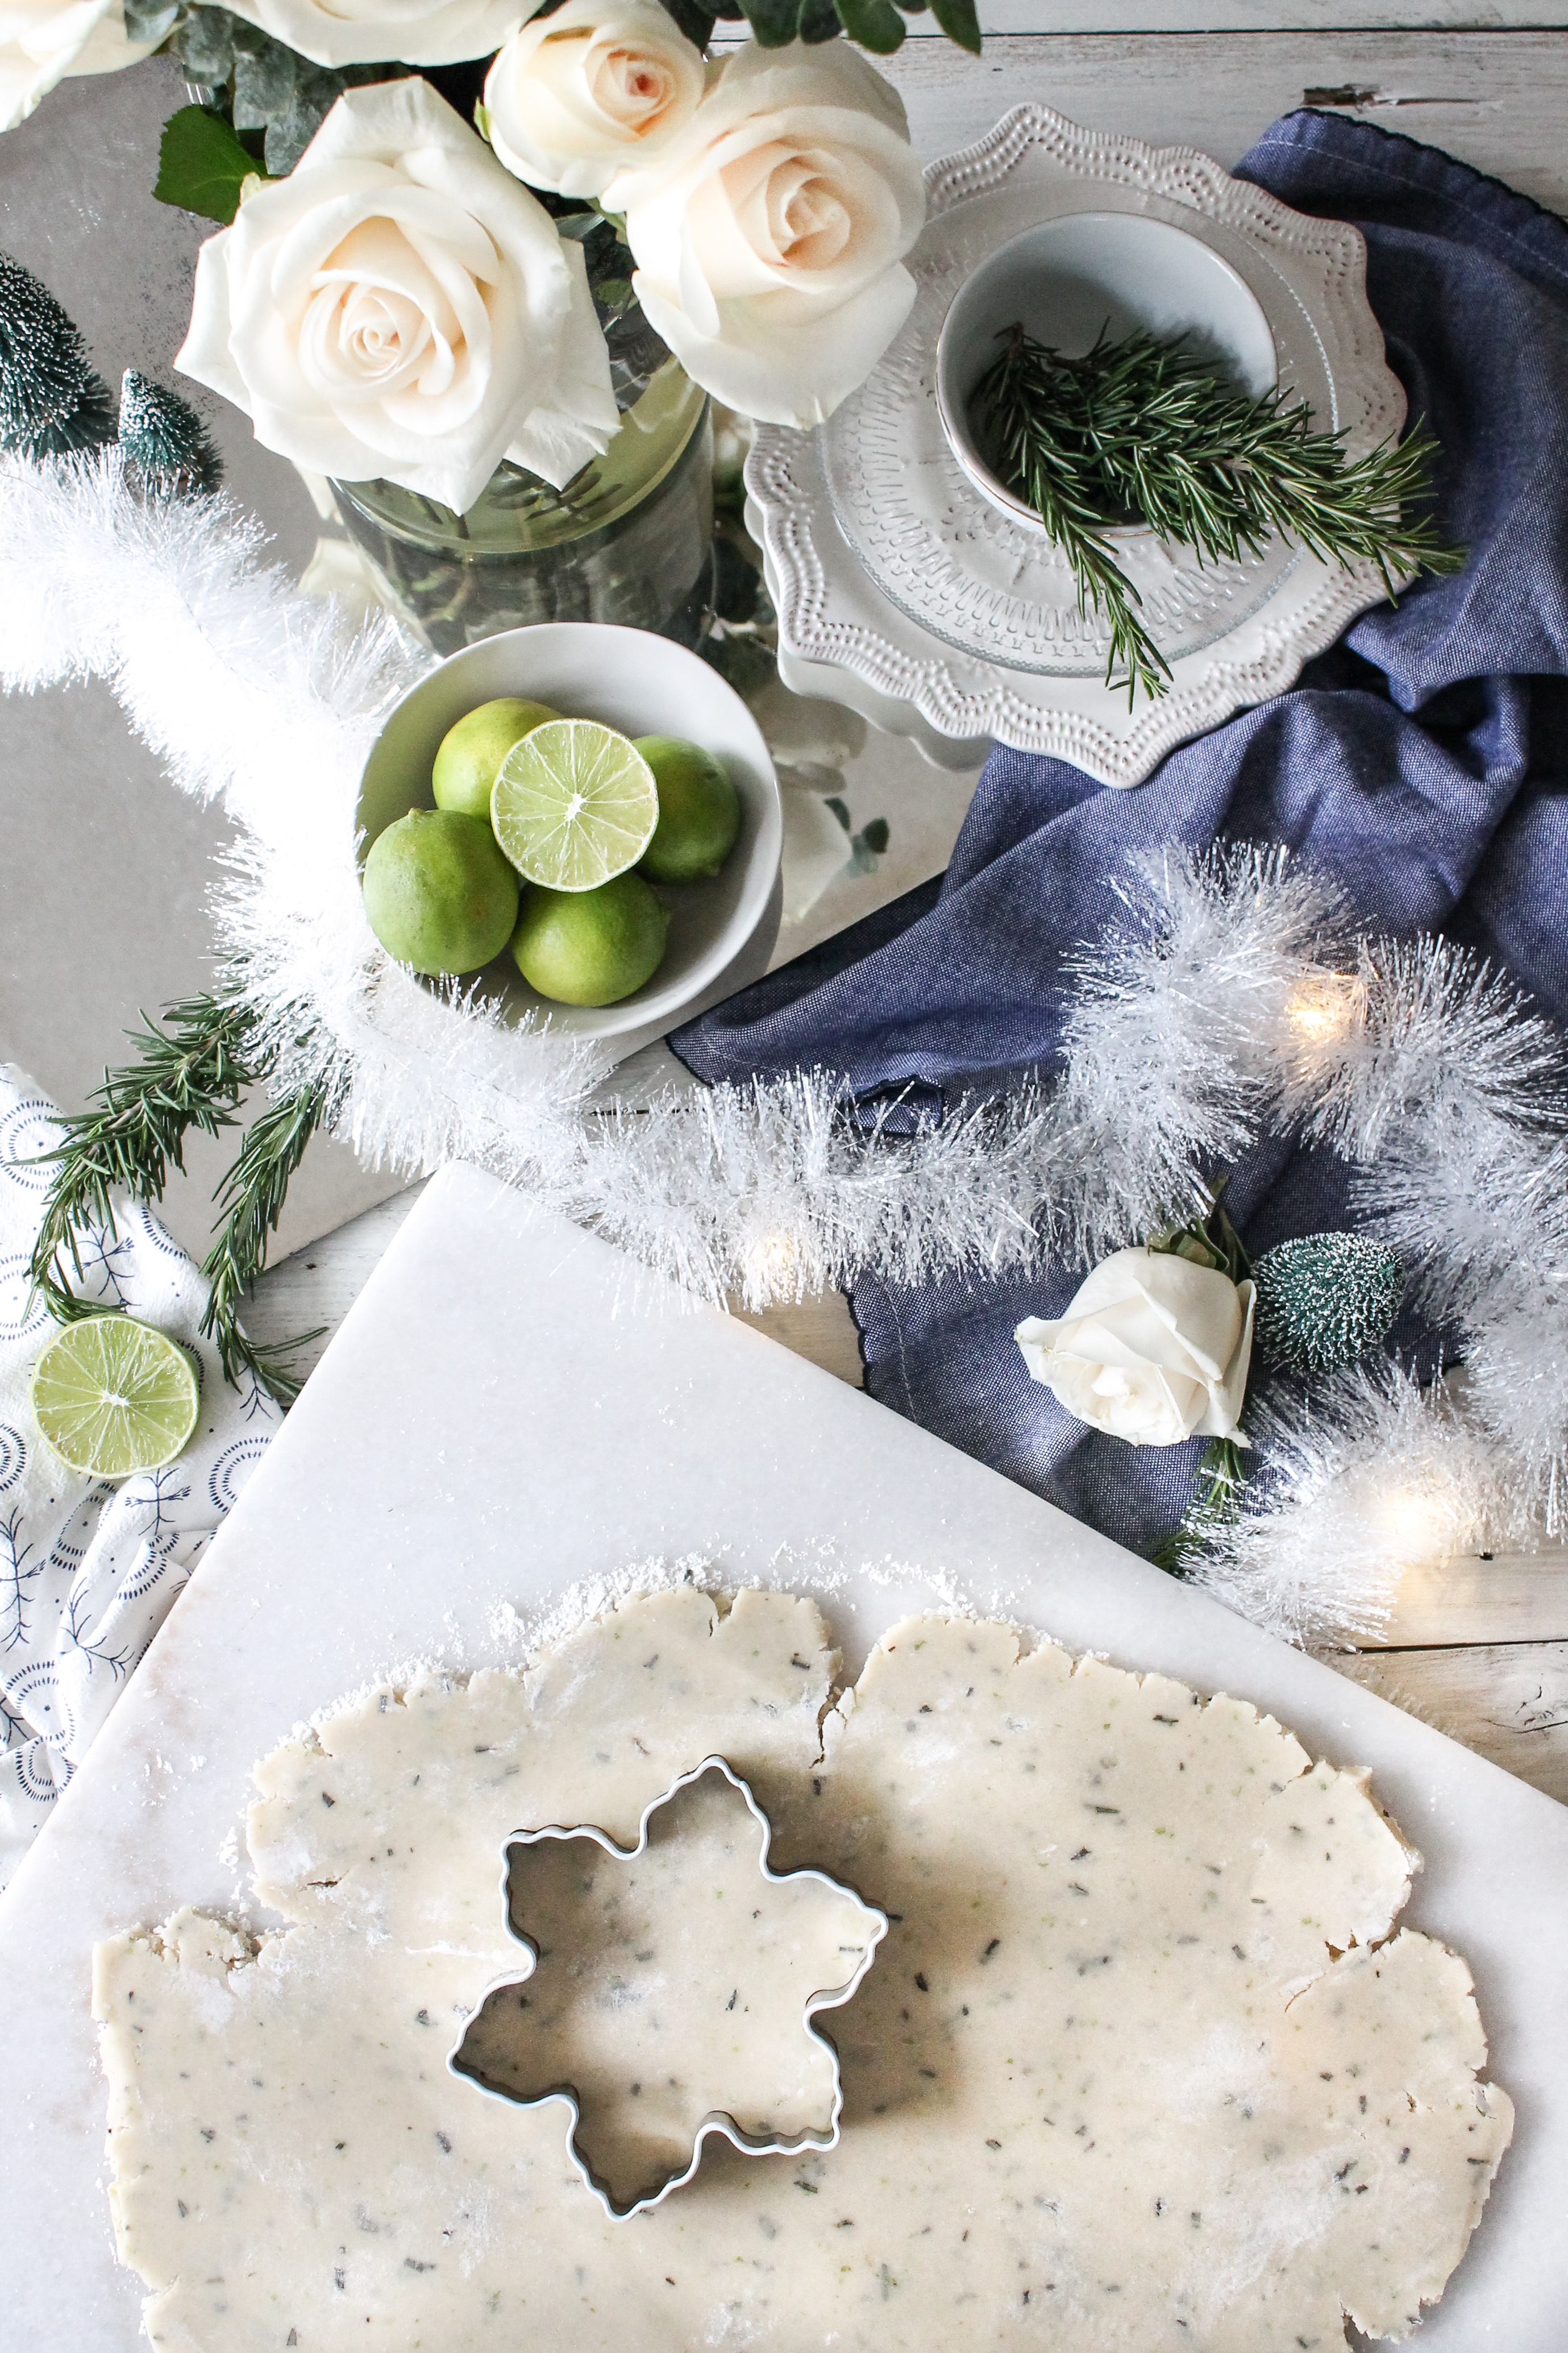 Rosemary Lime Shortbread Cookies are just what you need to get you through the early winter blues! These tasty treats still feel like Christmas, but with a fresh zing.